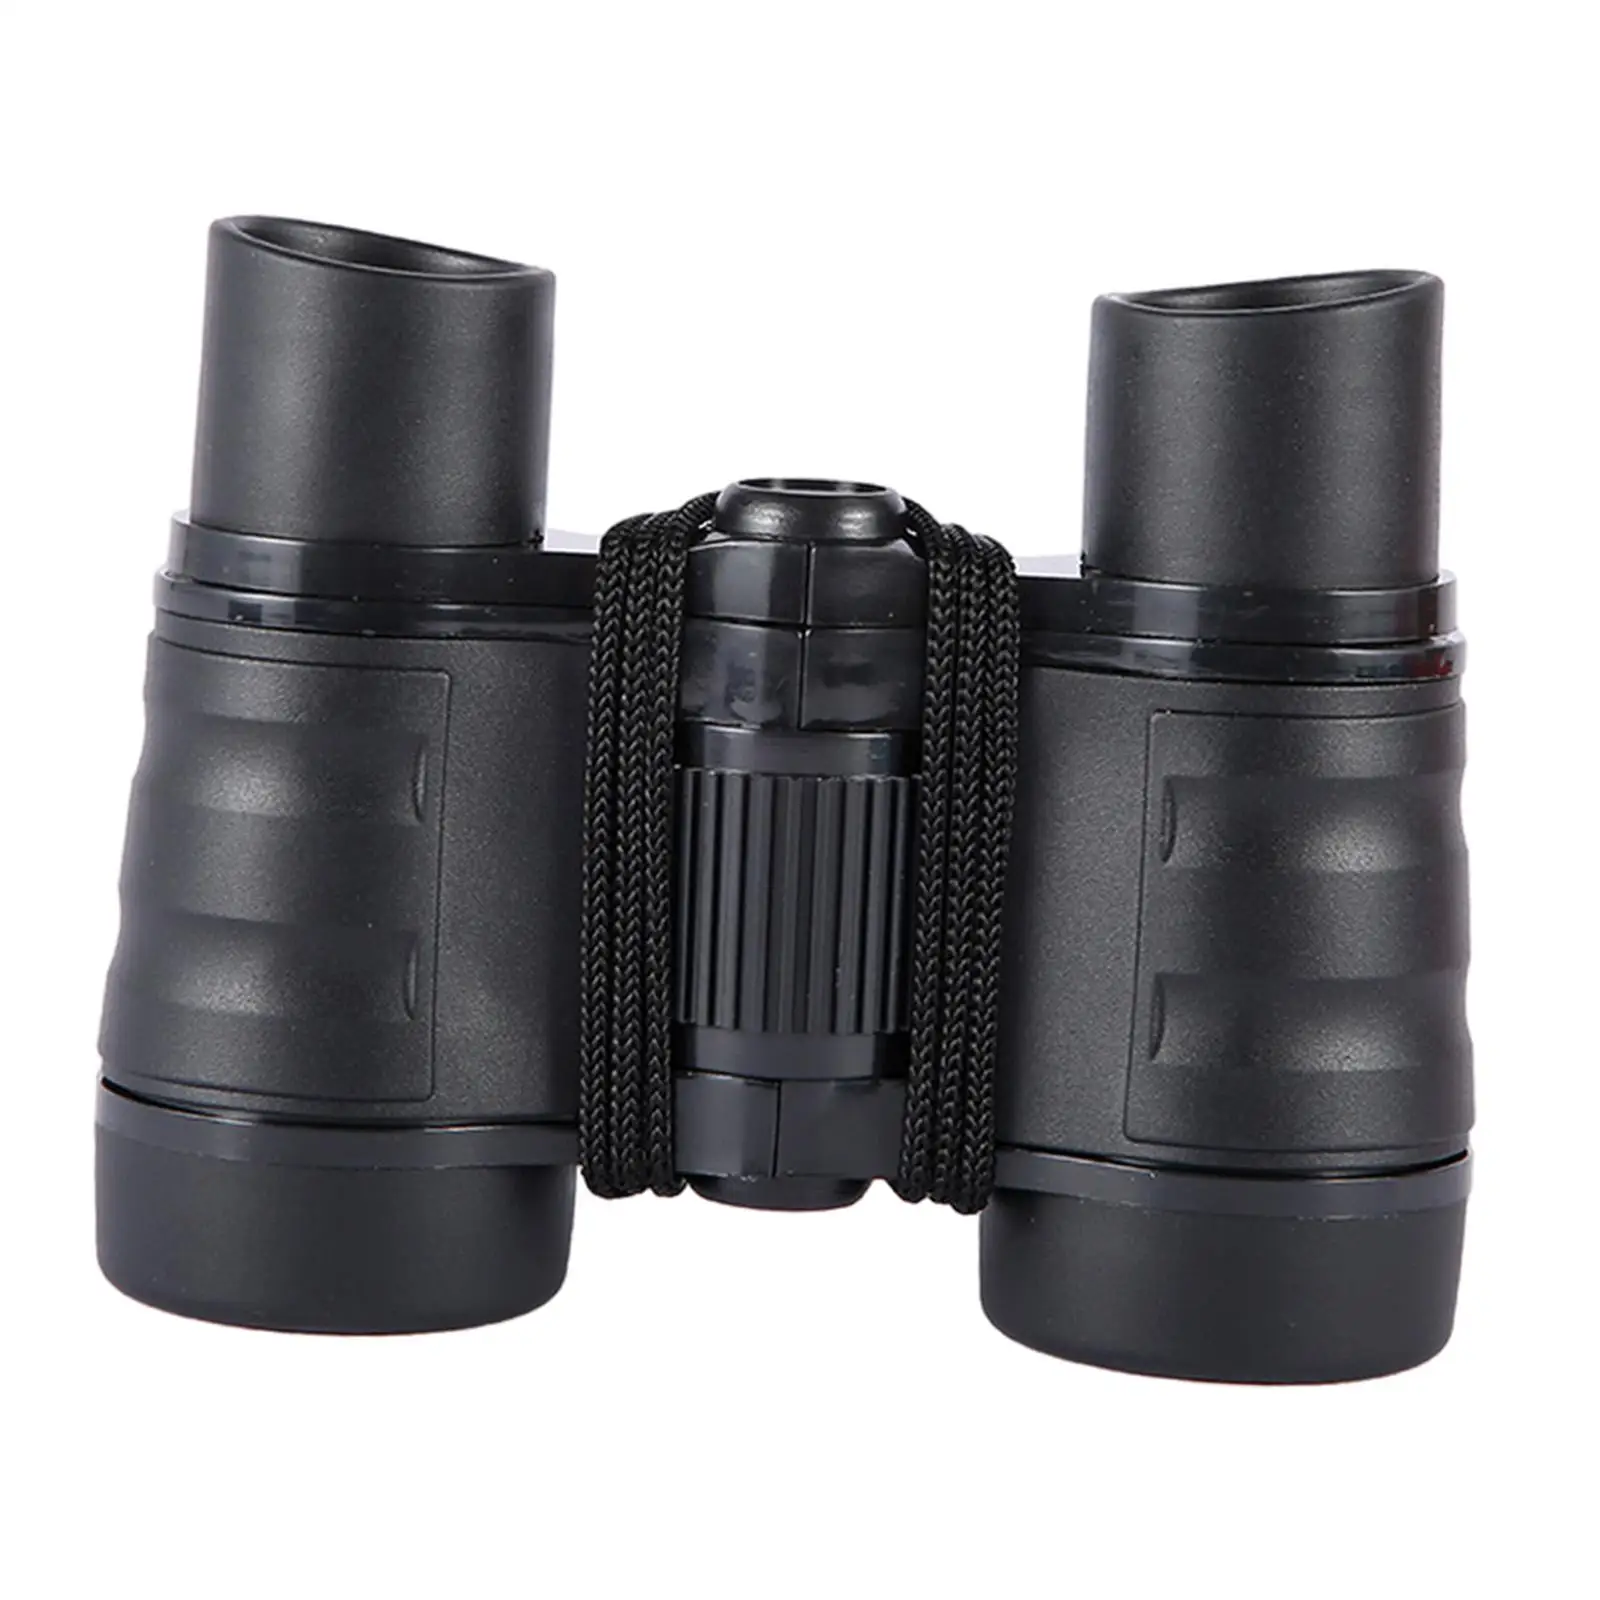 Kids Binoculars Toy Children Magnification Toy 4x30 Educational Bird Watching Telescope for Camping Birthday Outdoor Activity